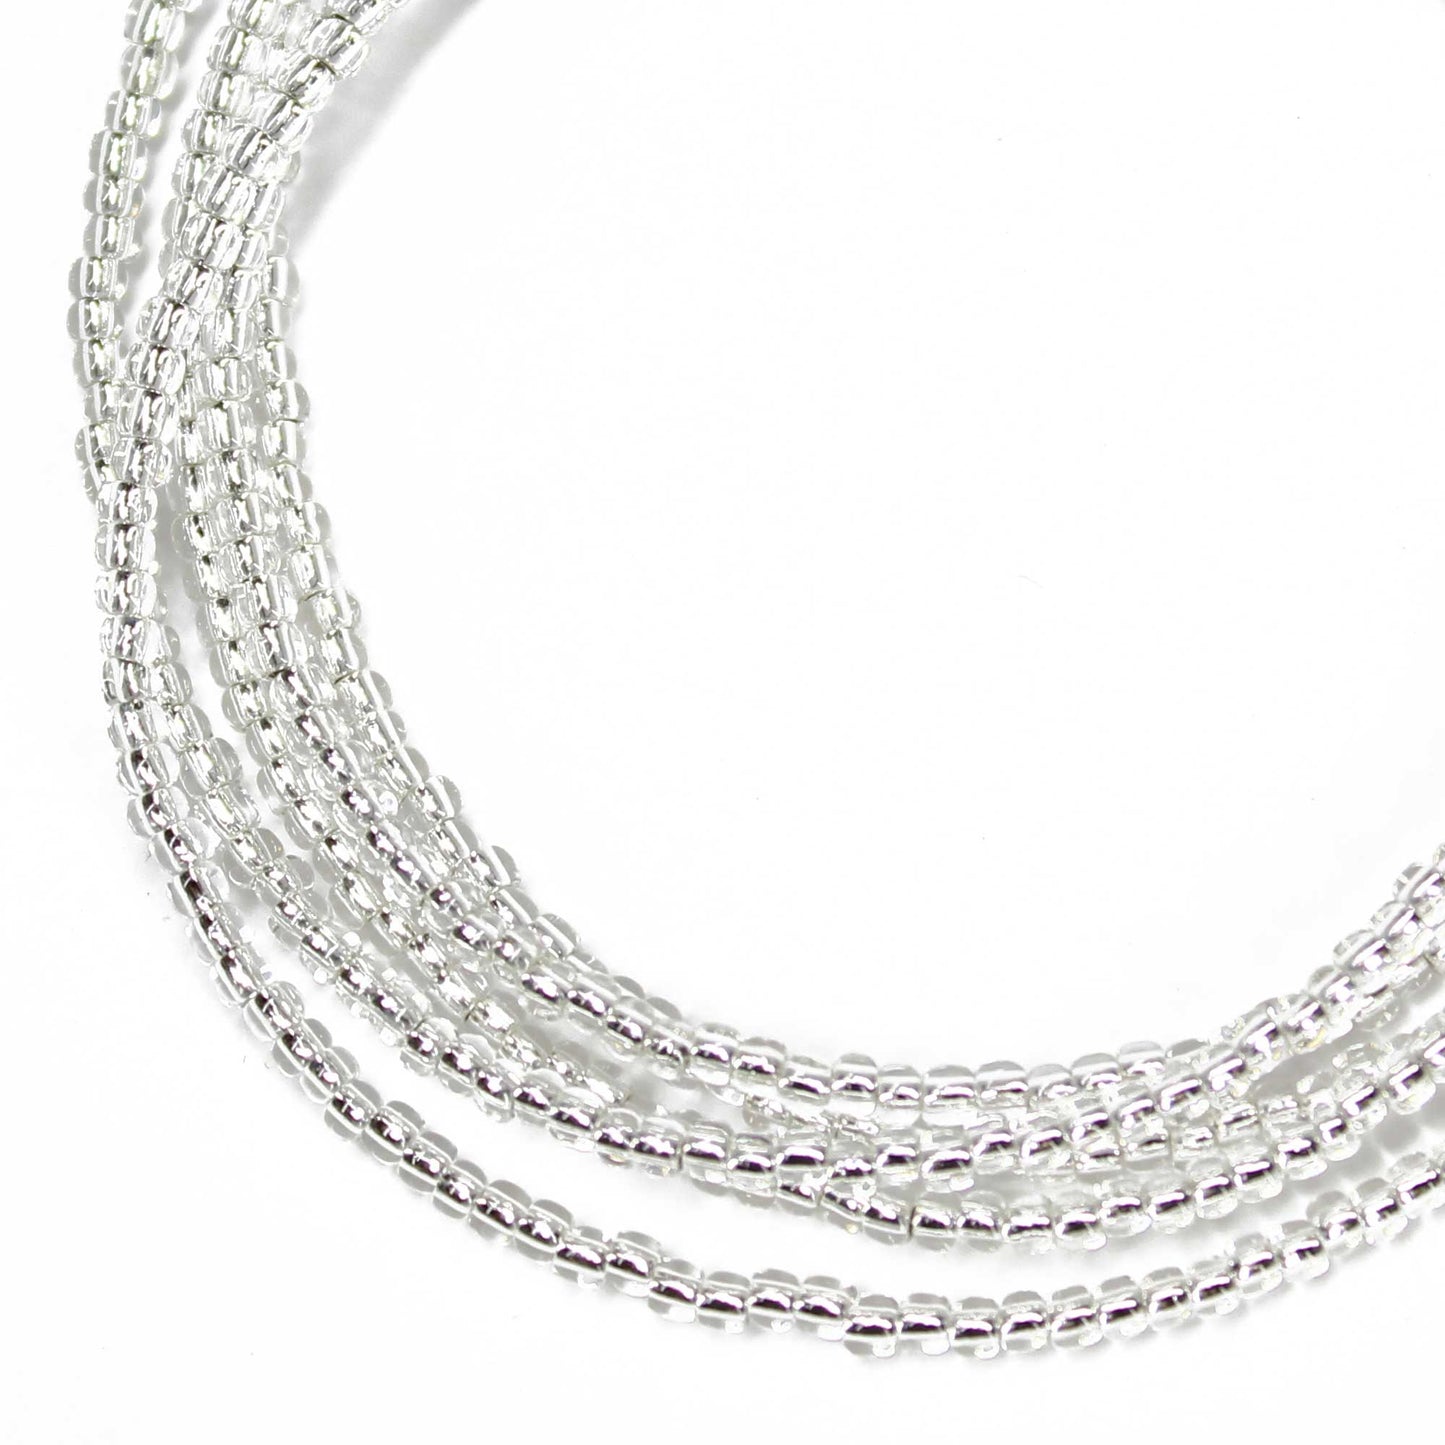 Silver Lined Crystal Seed Bead Necklace